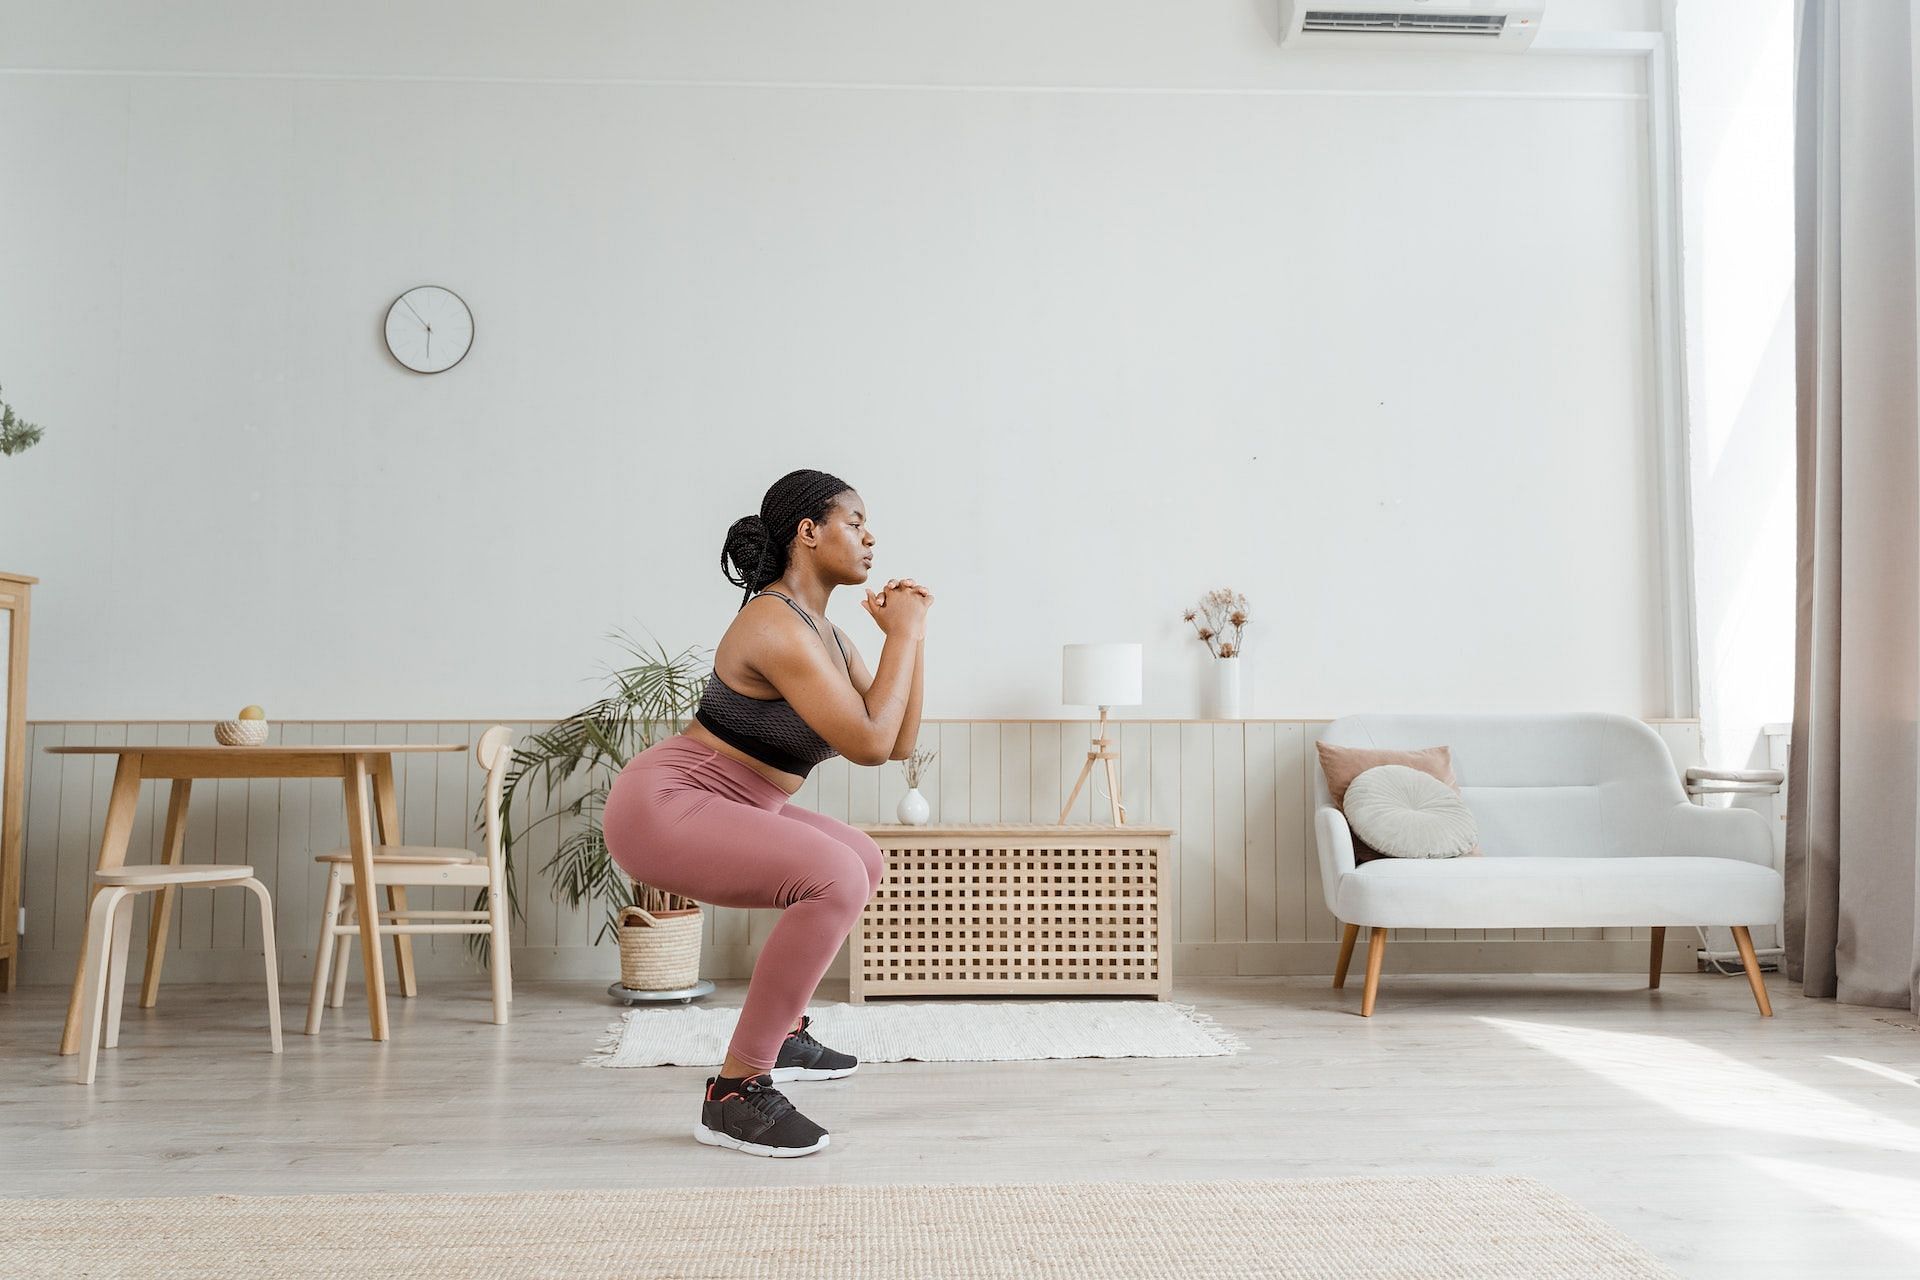 Bodyweight squats can be added to a home workout routine. (Photo via Pexels/MART PRODUCTION)